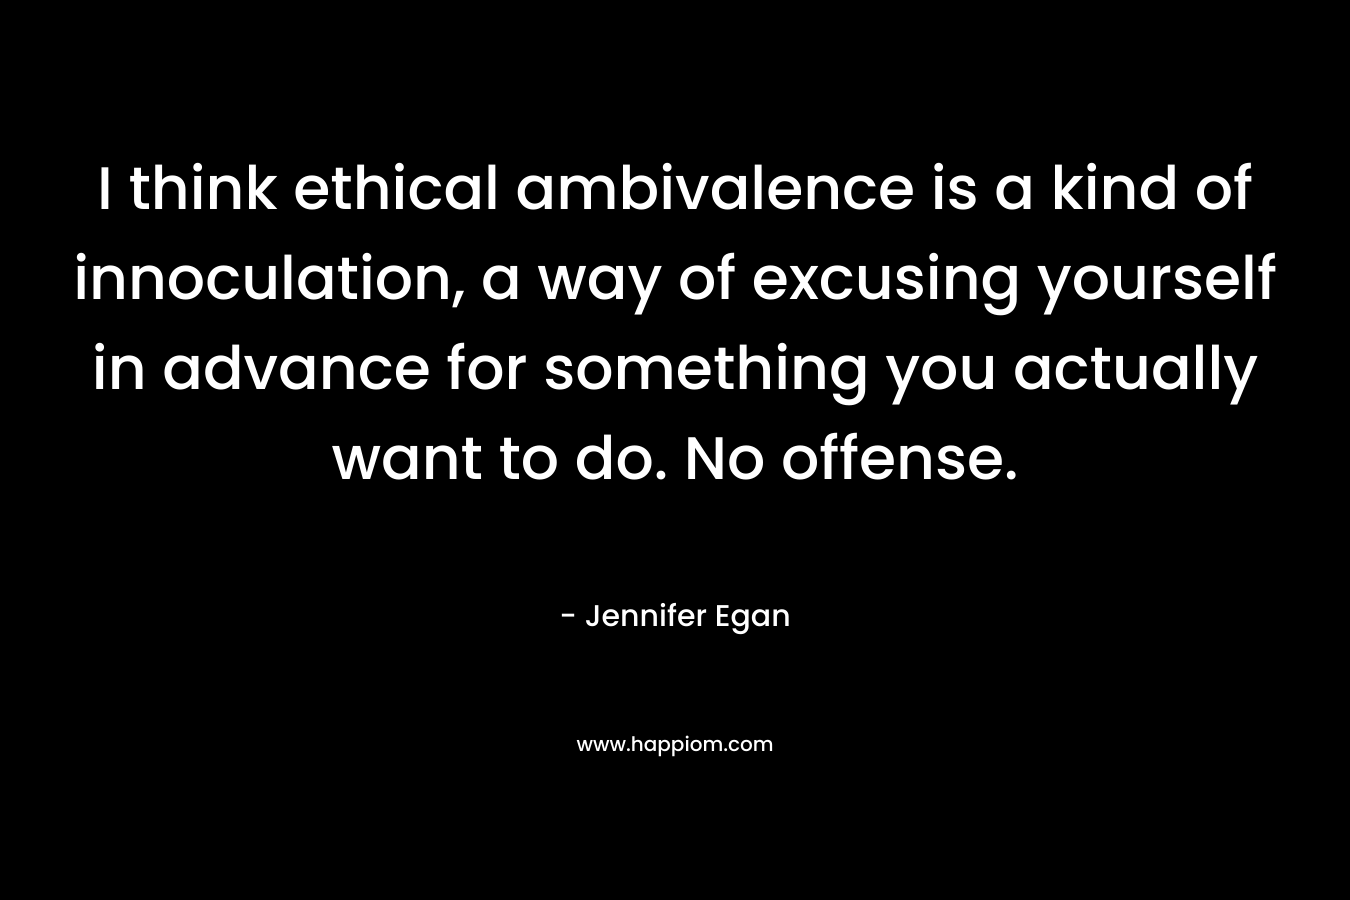 I think ethical ambivalence is a kind of innoculation, a way of excusing yourself in advance for something you actually want to do. No offense. – Jennifer Egan